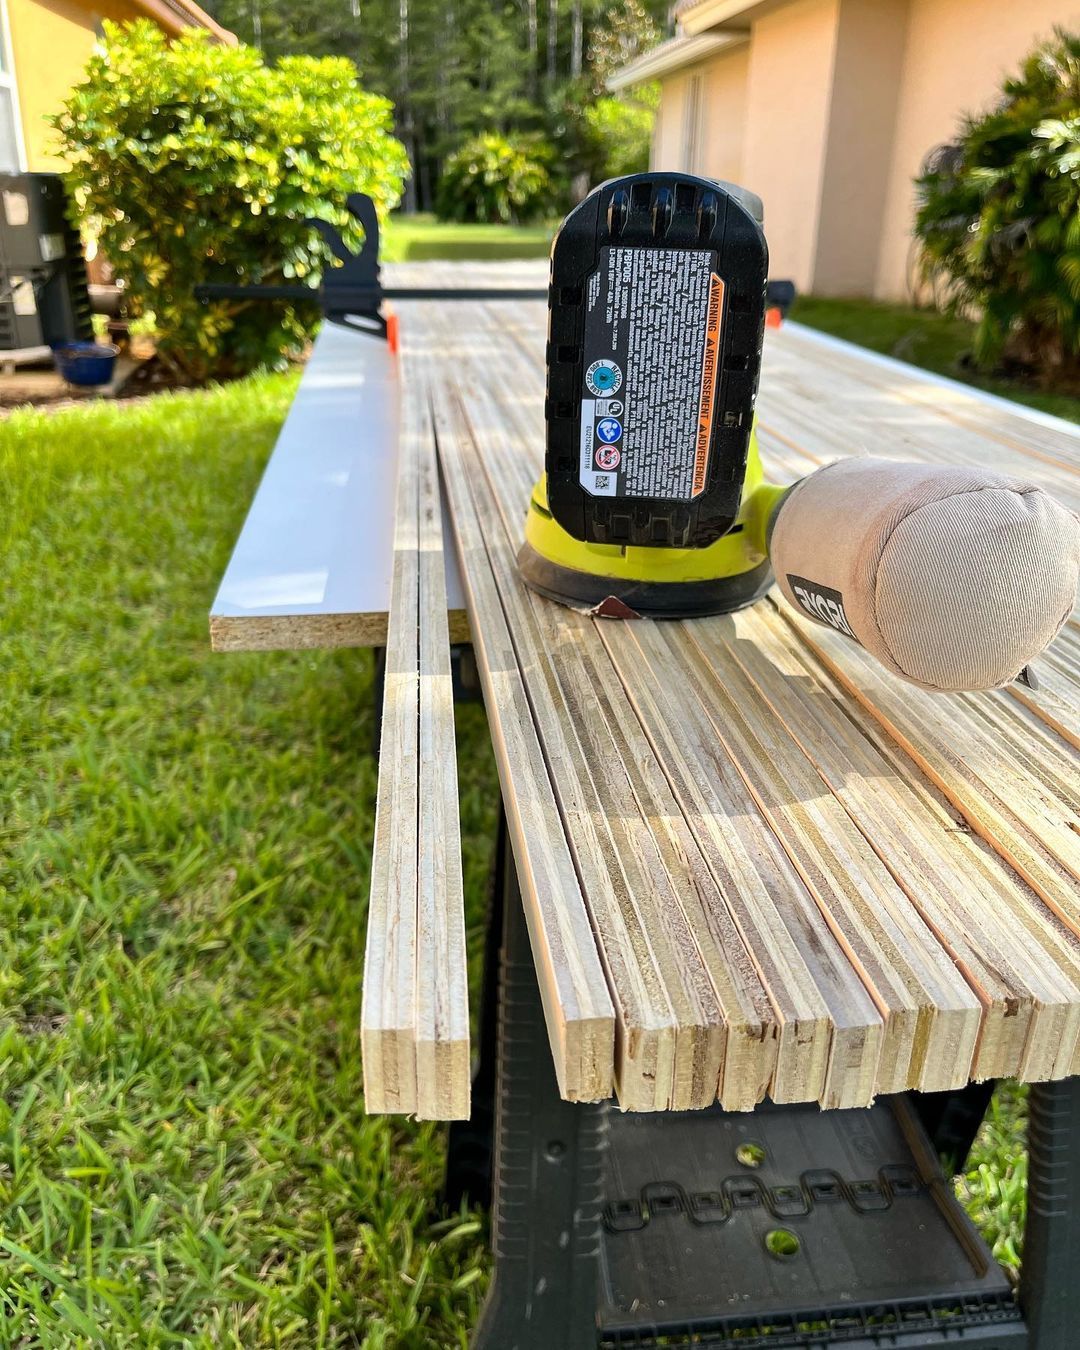 @creations_with_stephanie shares one of her most rewarding #RYOBImade DIY projects! Swipe through to see her journey.

This is your sign to take on the DIY project you've been putting off! Head to our website, through the link in our bio, for inspiration and browse our range now 🙌

#RYOBIau #BatteryPowered #RYOBImade #powertools #project #DIY #DIYinspiration